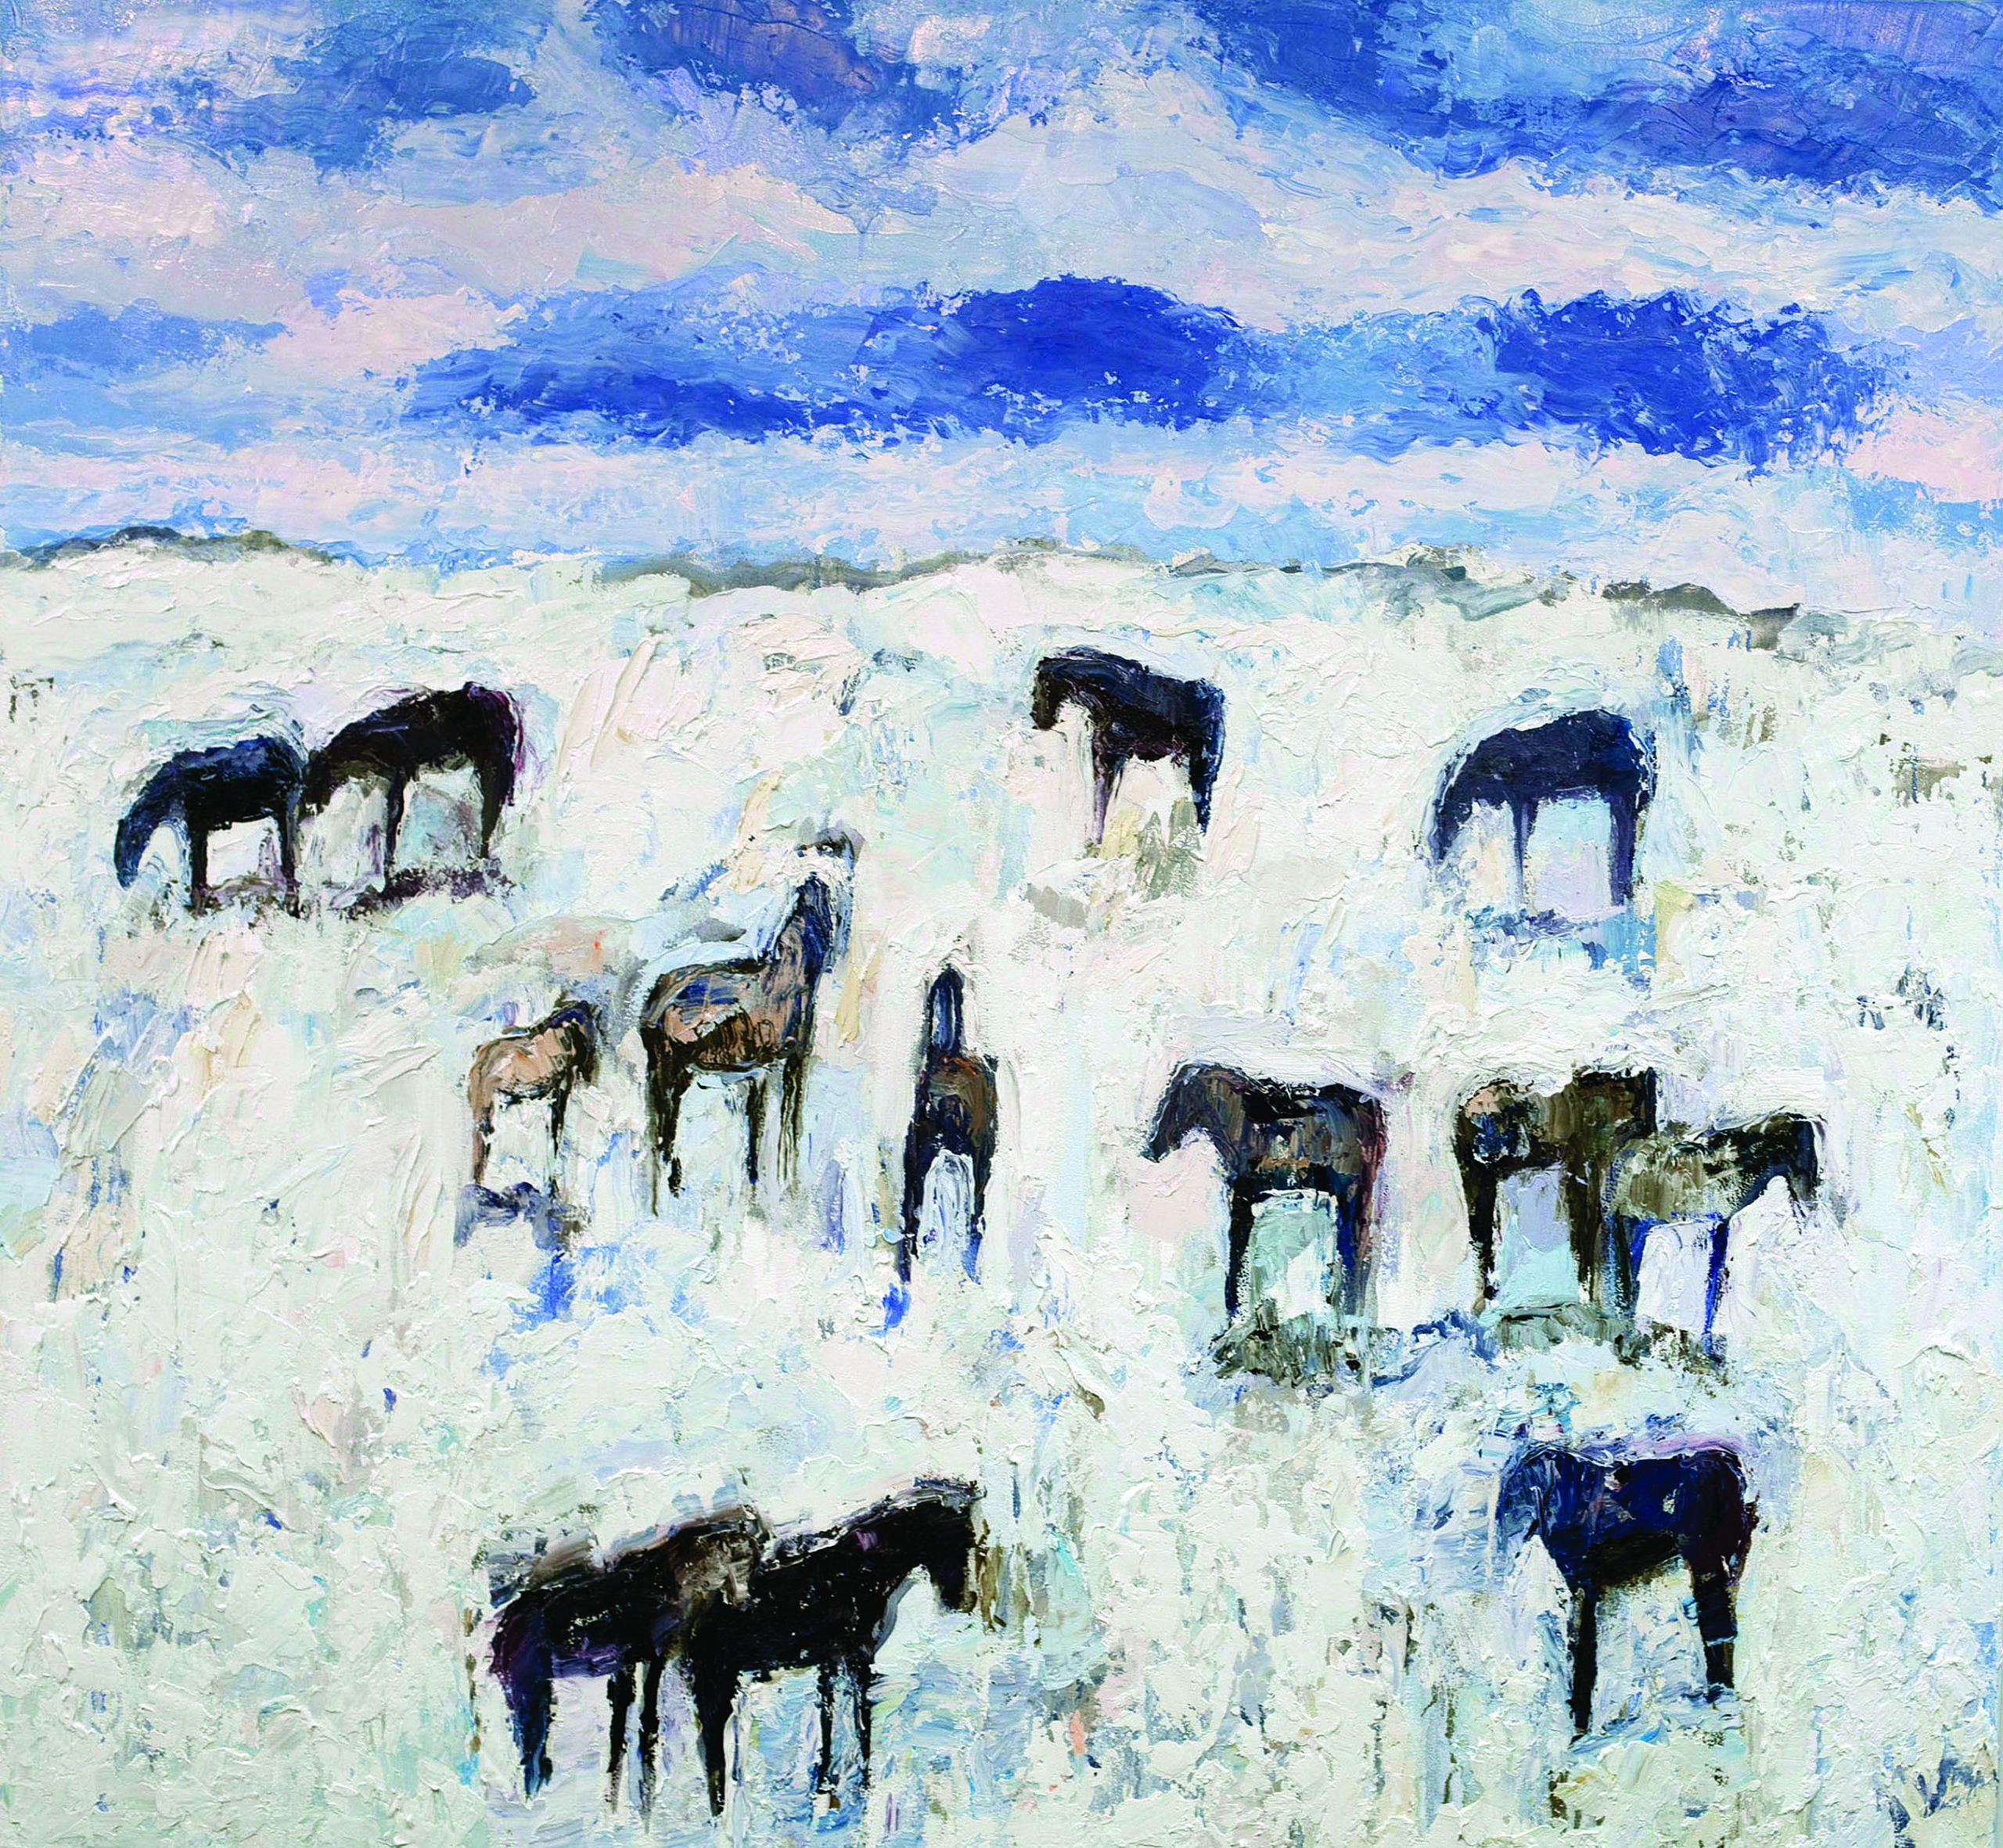 

											Theodore Waddell</b>

											<em>
												Theodore Waddell</em> 

											<h4>
												December 4 - February 13, 2020											</h4>

		                																																<i>Winter Horses #14,</i>  
																																																					oil and encaustic on canvas, 
																																								66 x 72 inches 
																								
		                				